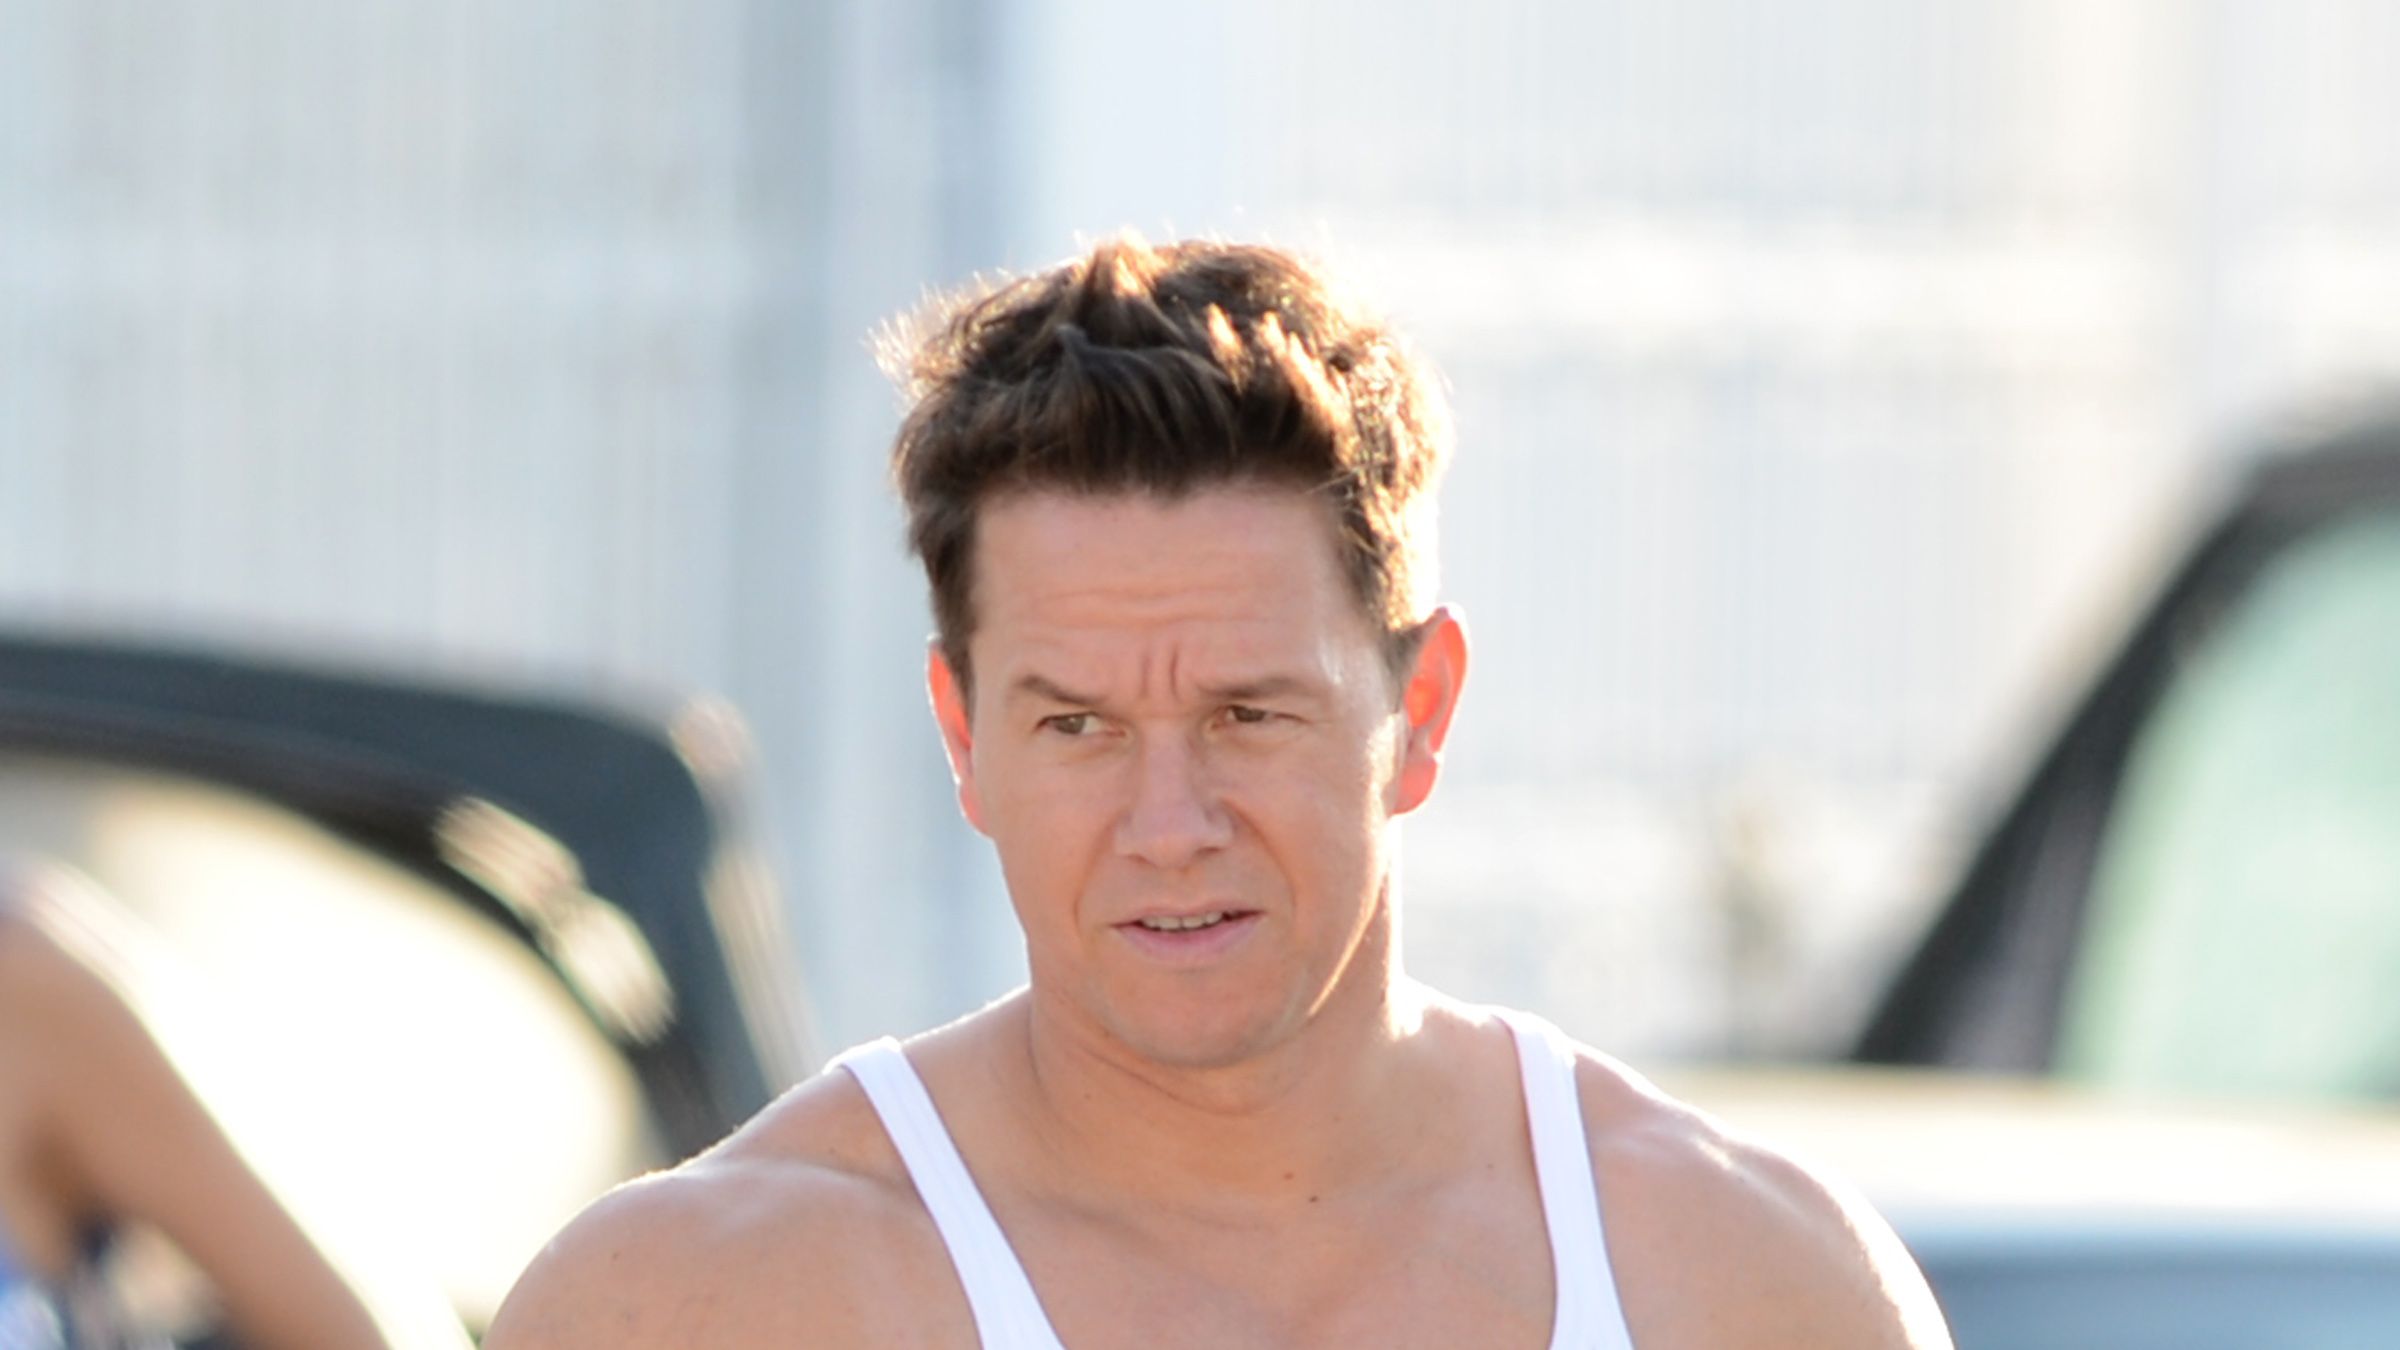 Here's Our Verdict on Mark Wahlberg's Daily Routine